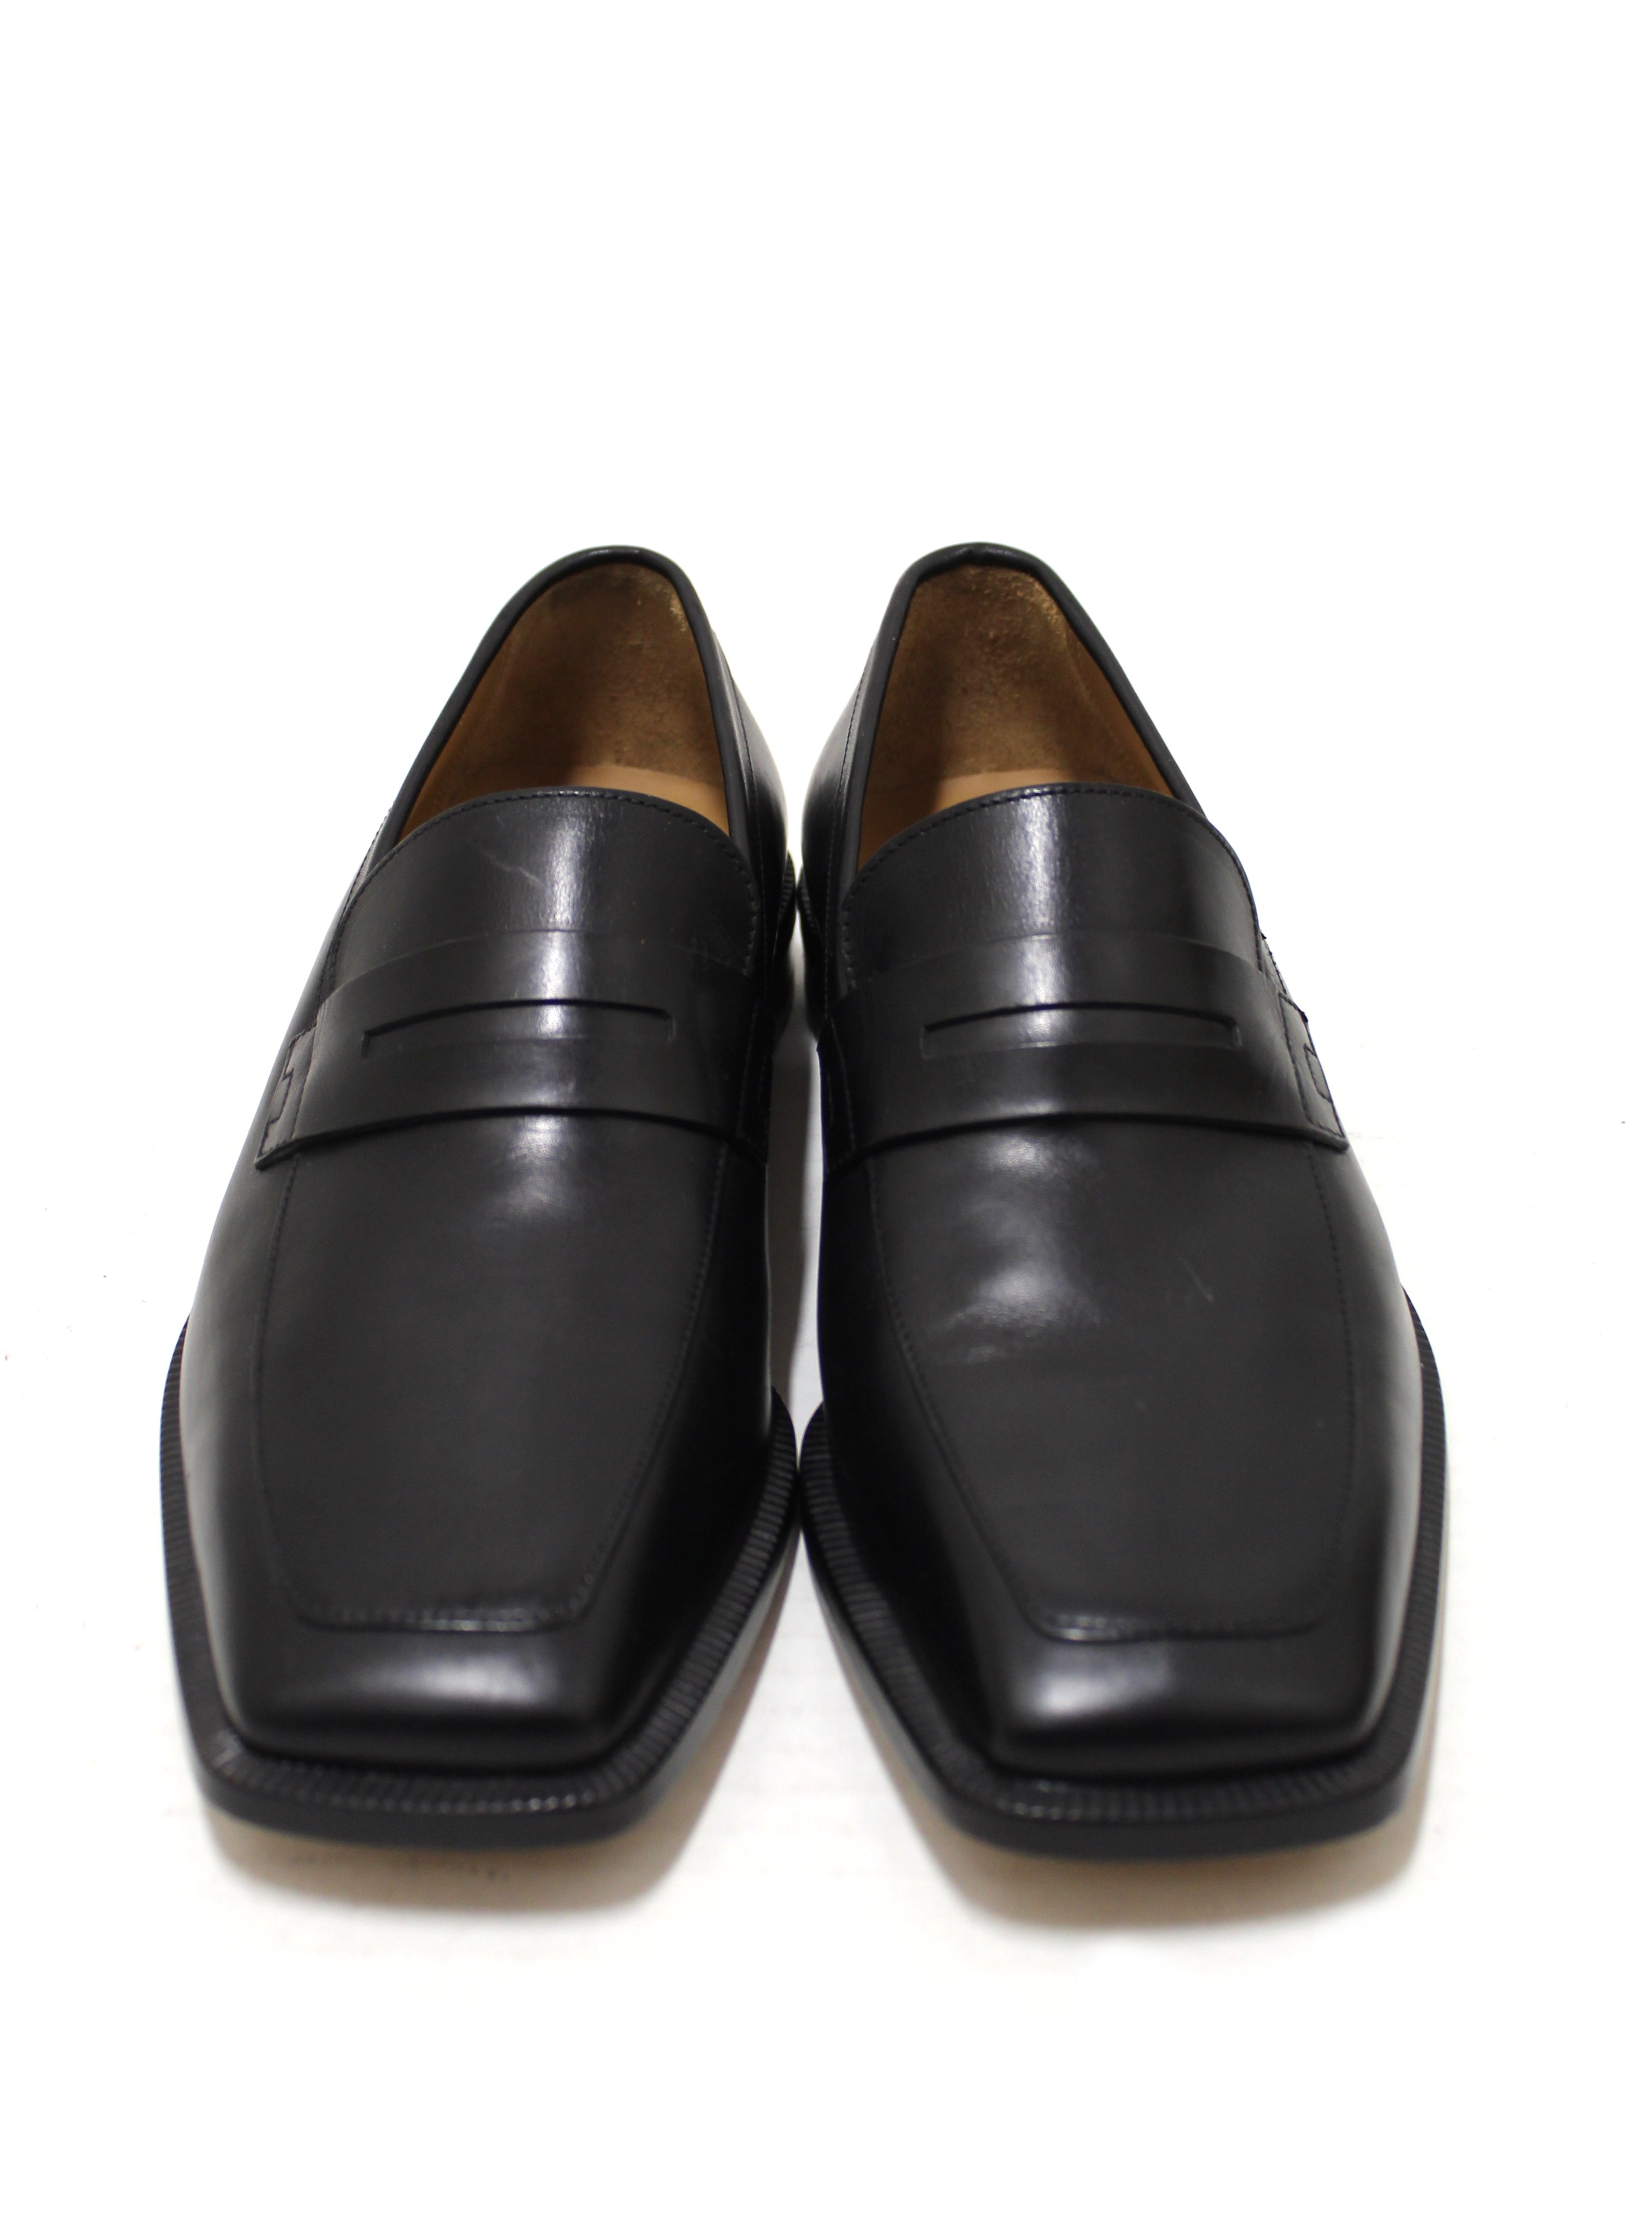 Buy Louis Vuitton LV Clubline Patent Leather Enamel Monogram Loafer Dress  Shoes 6 1/2 Black from Japan - Buy authentic Plus exclusive items from  Japan